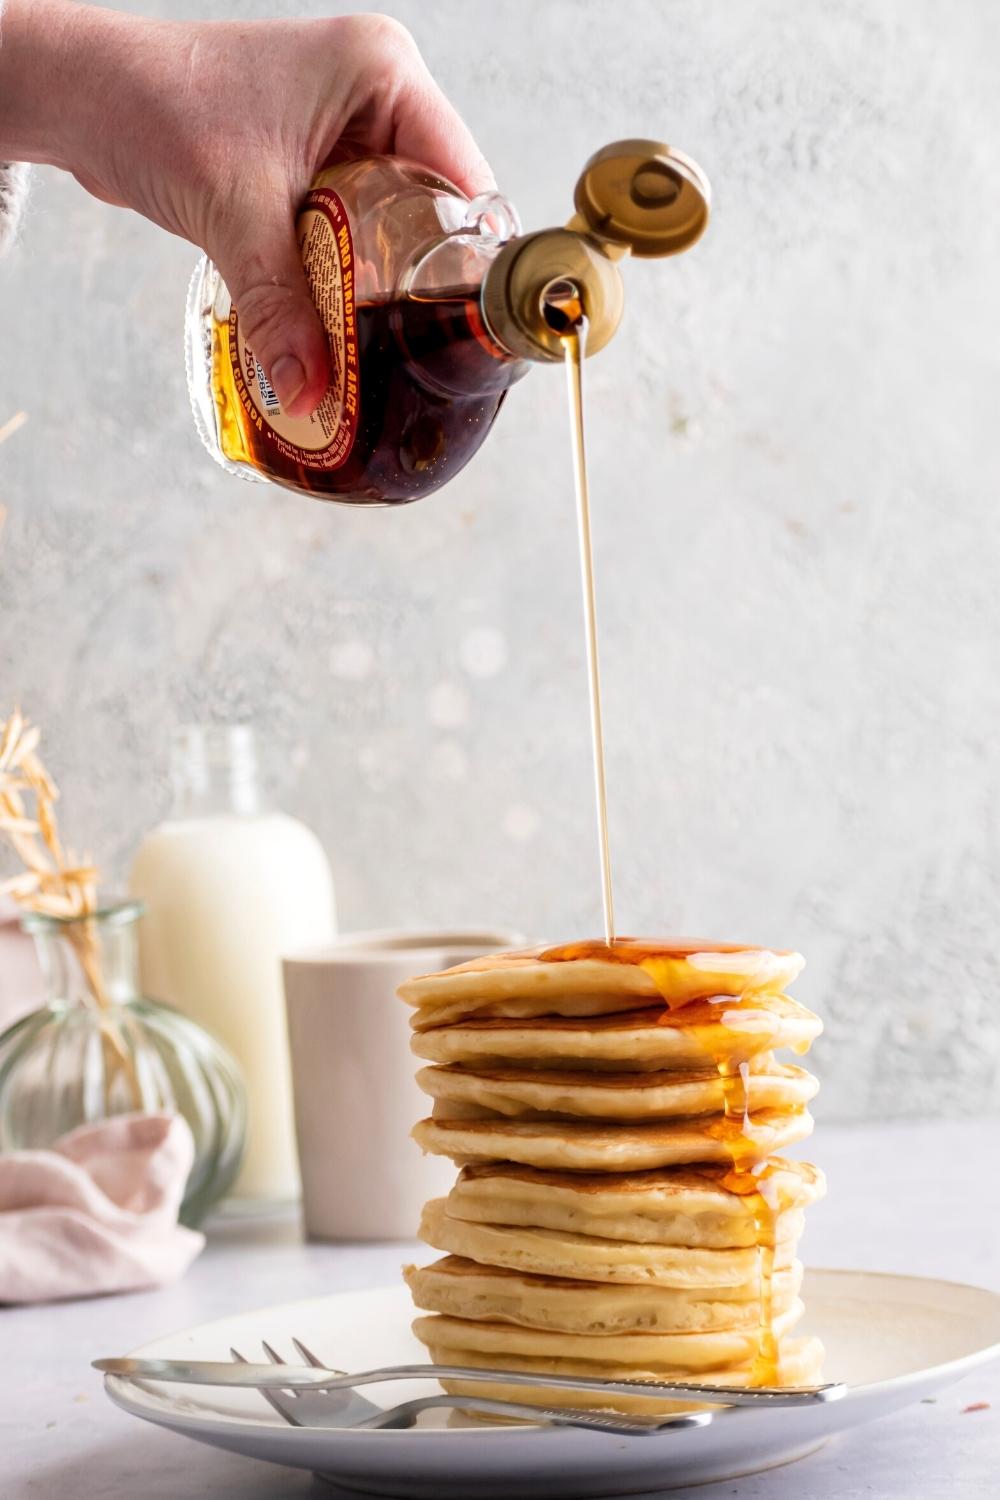 A hand holding a bottle of maple syrup pouring it on a stack of pancakes that are on a white plate with a fork and knife on it.